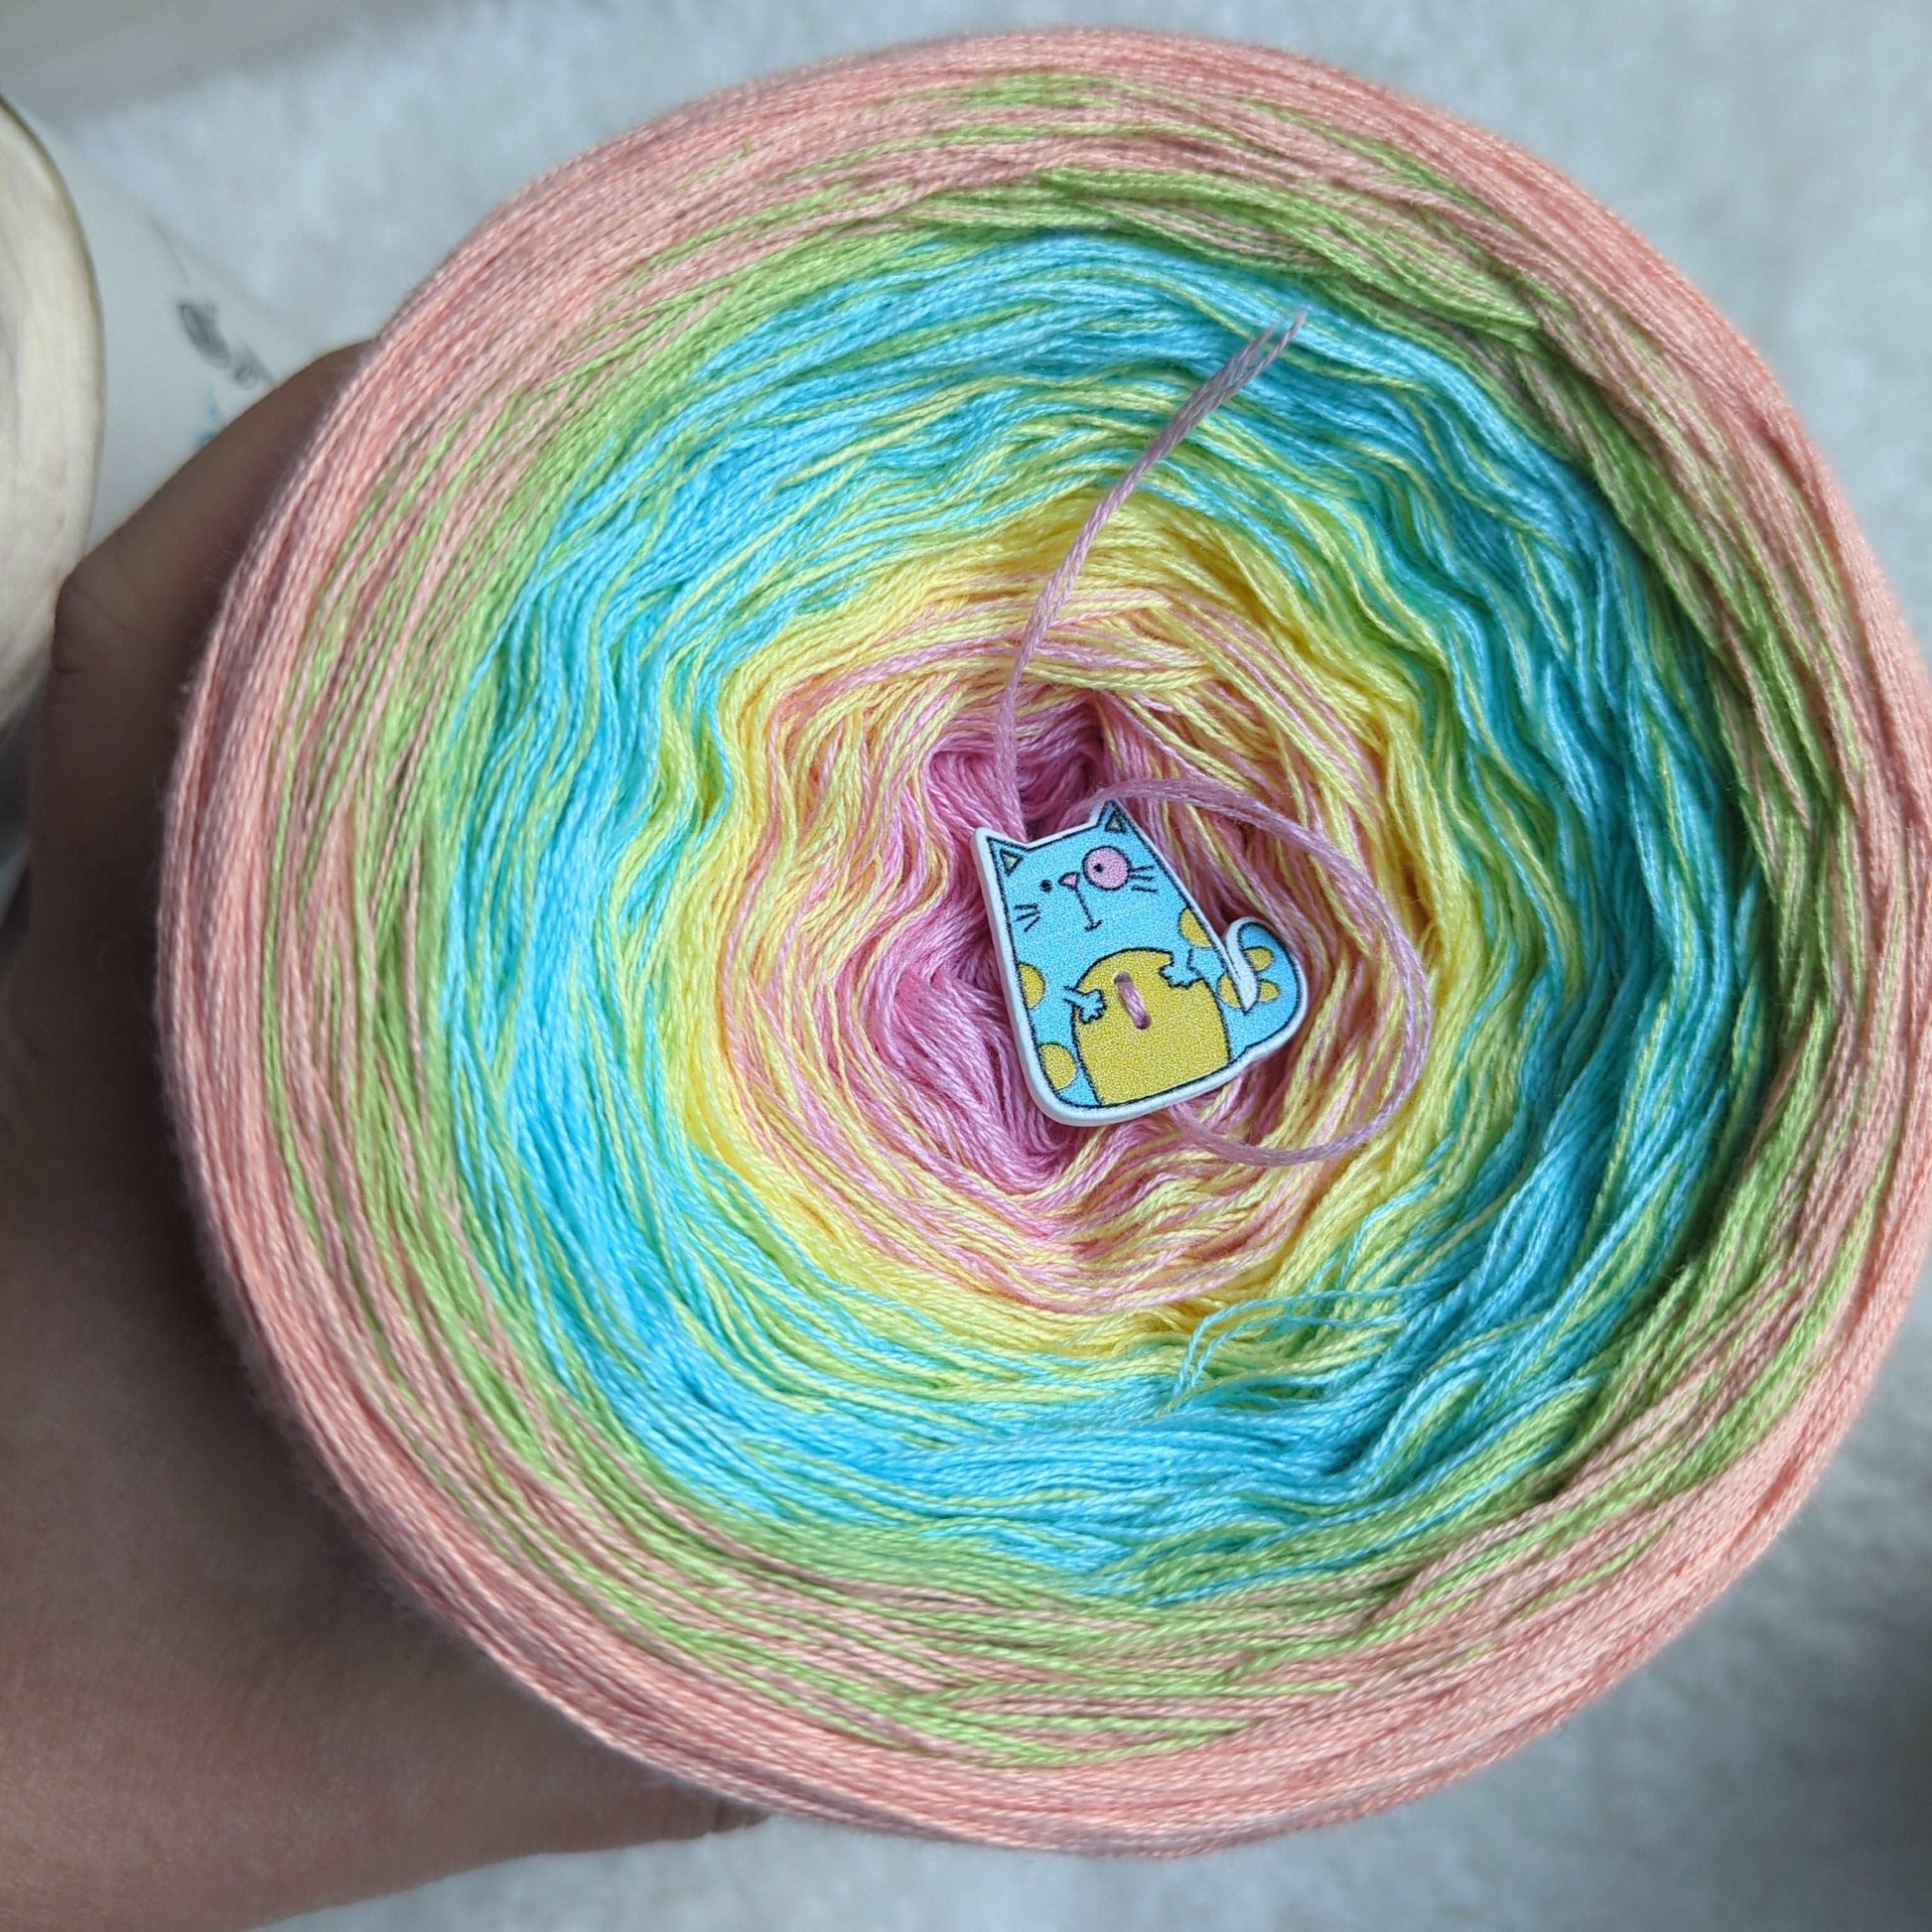 "My little pony" cotton/acrylic ombre yarn cake, 300g, about 1500m, 3ply